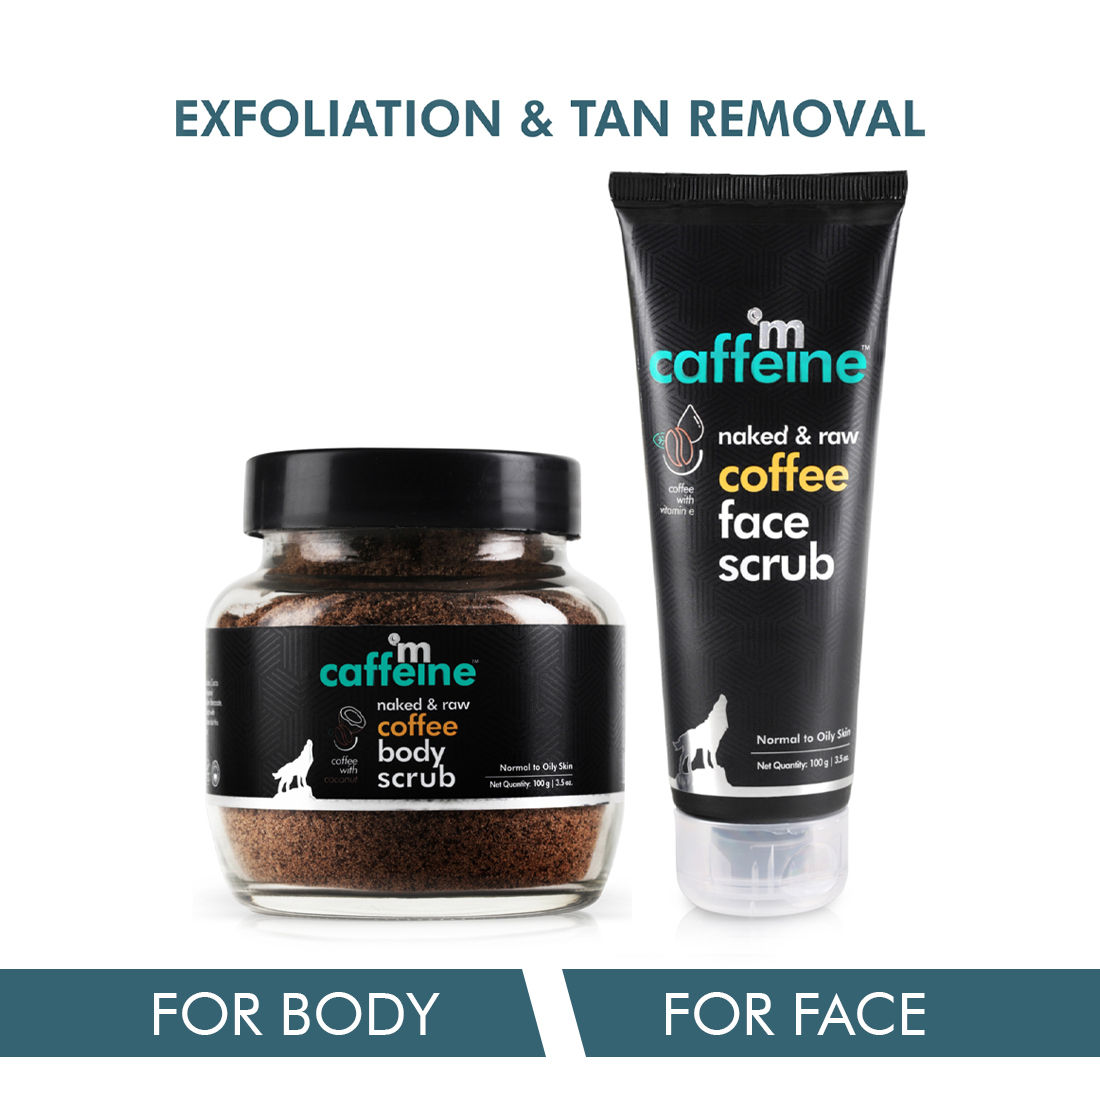 MCaffeine Exfoliating Coffee Face & Body Scrub Combo for Tan, Blackheads & Dirt Removal for Soft Skin